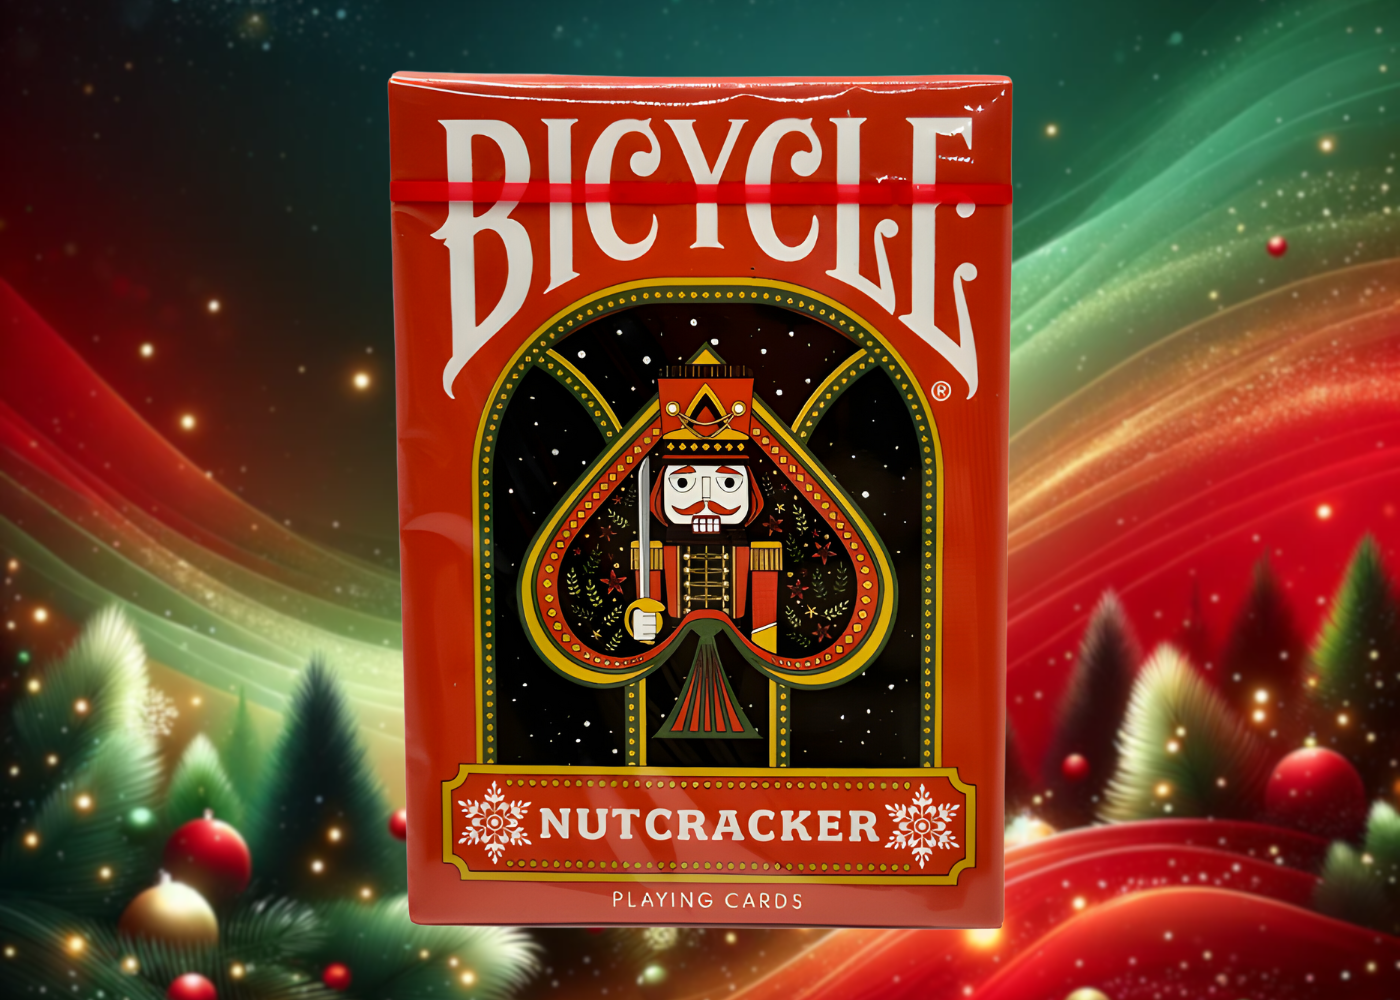 Nutcracker Bicycle Stripper Playing Cards